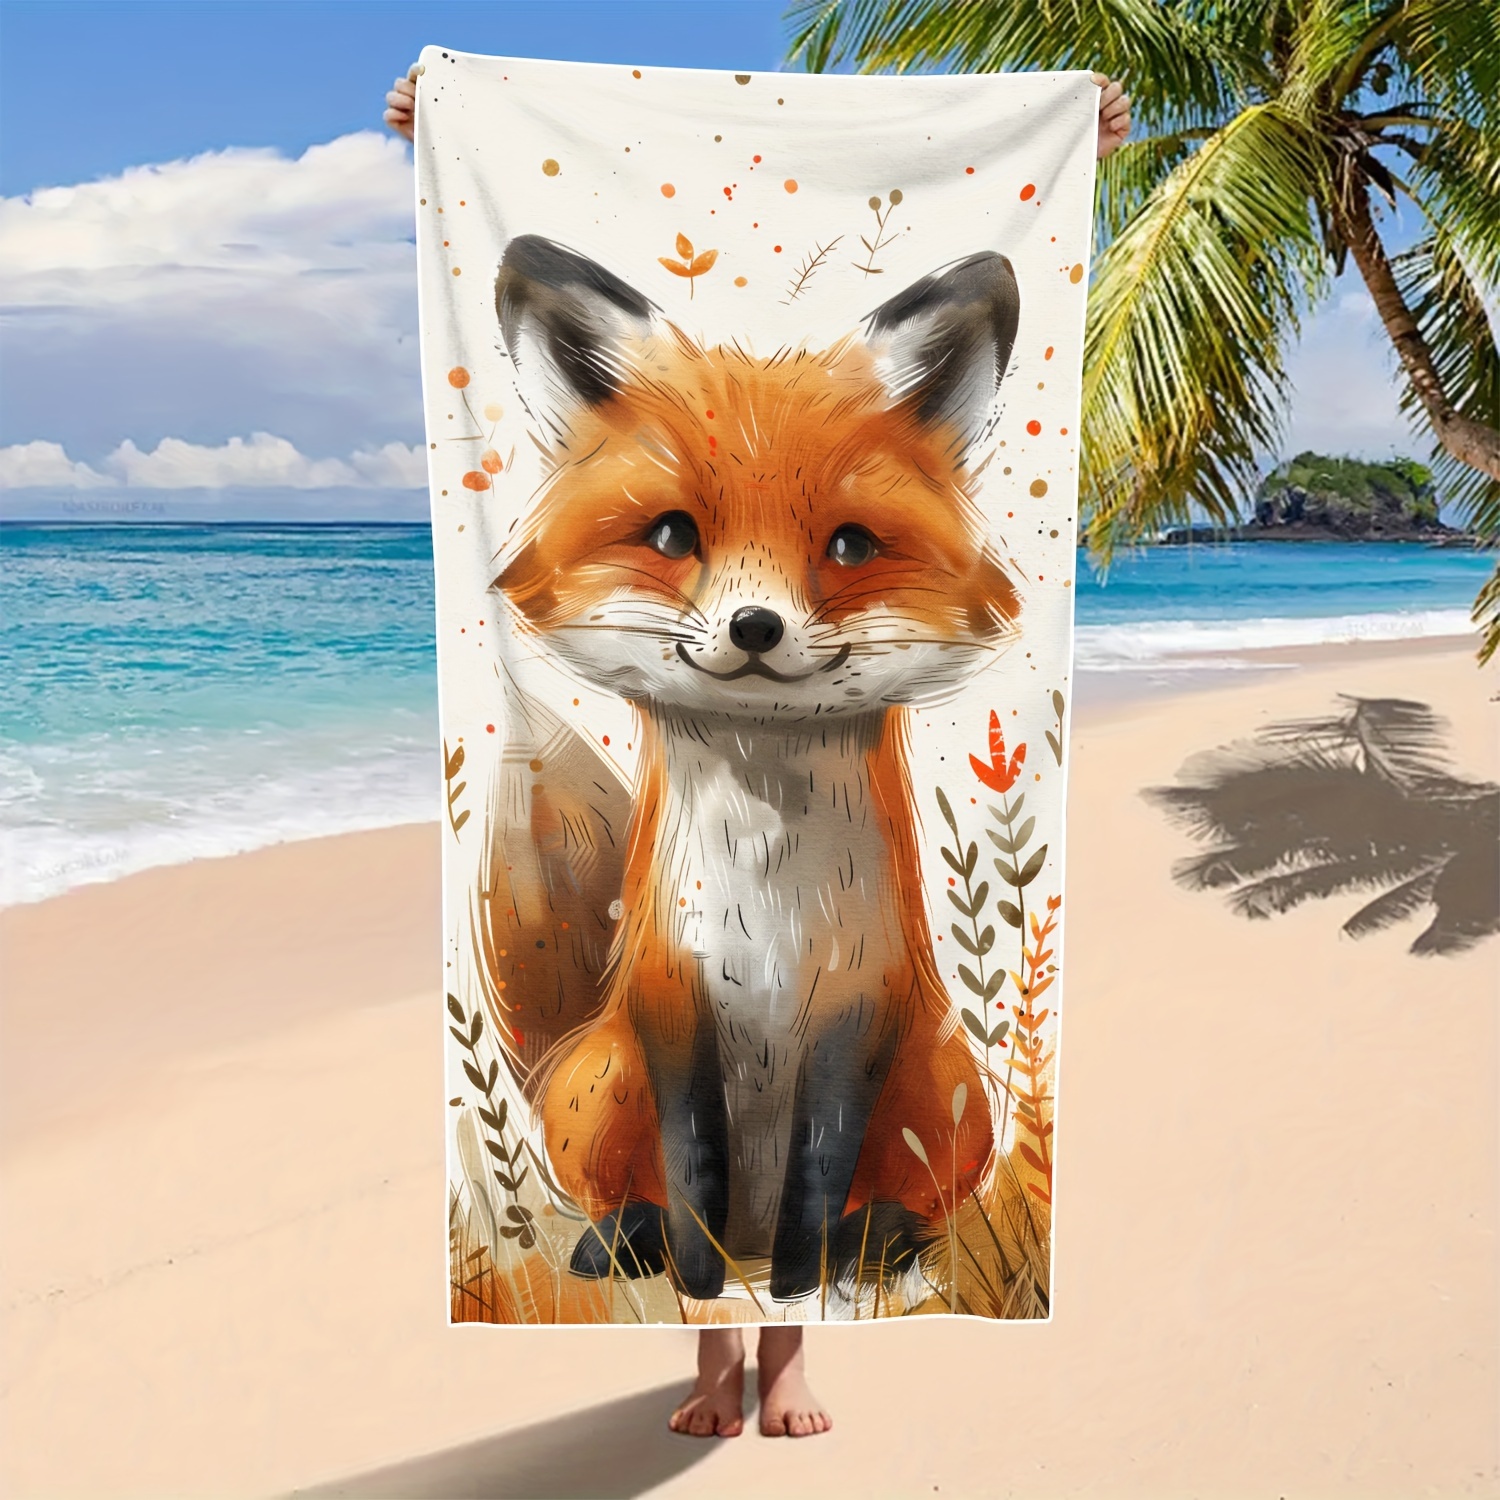 

Fox Print Super Absorbent Beach Towel, Comfortable Quick Drying Swimming Pool Towel, Large Beach Blanket, For Outdoor Travel Holiday Camping Swimming Vacation, Beach Essentials